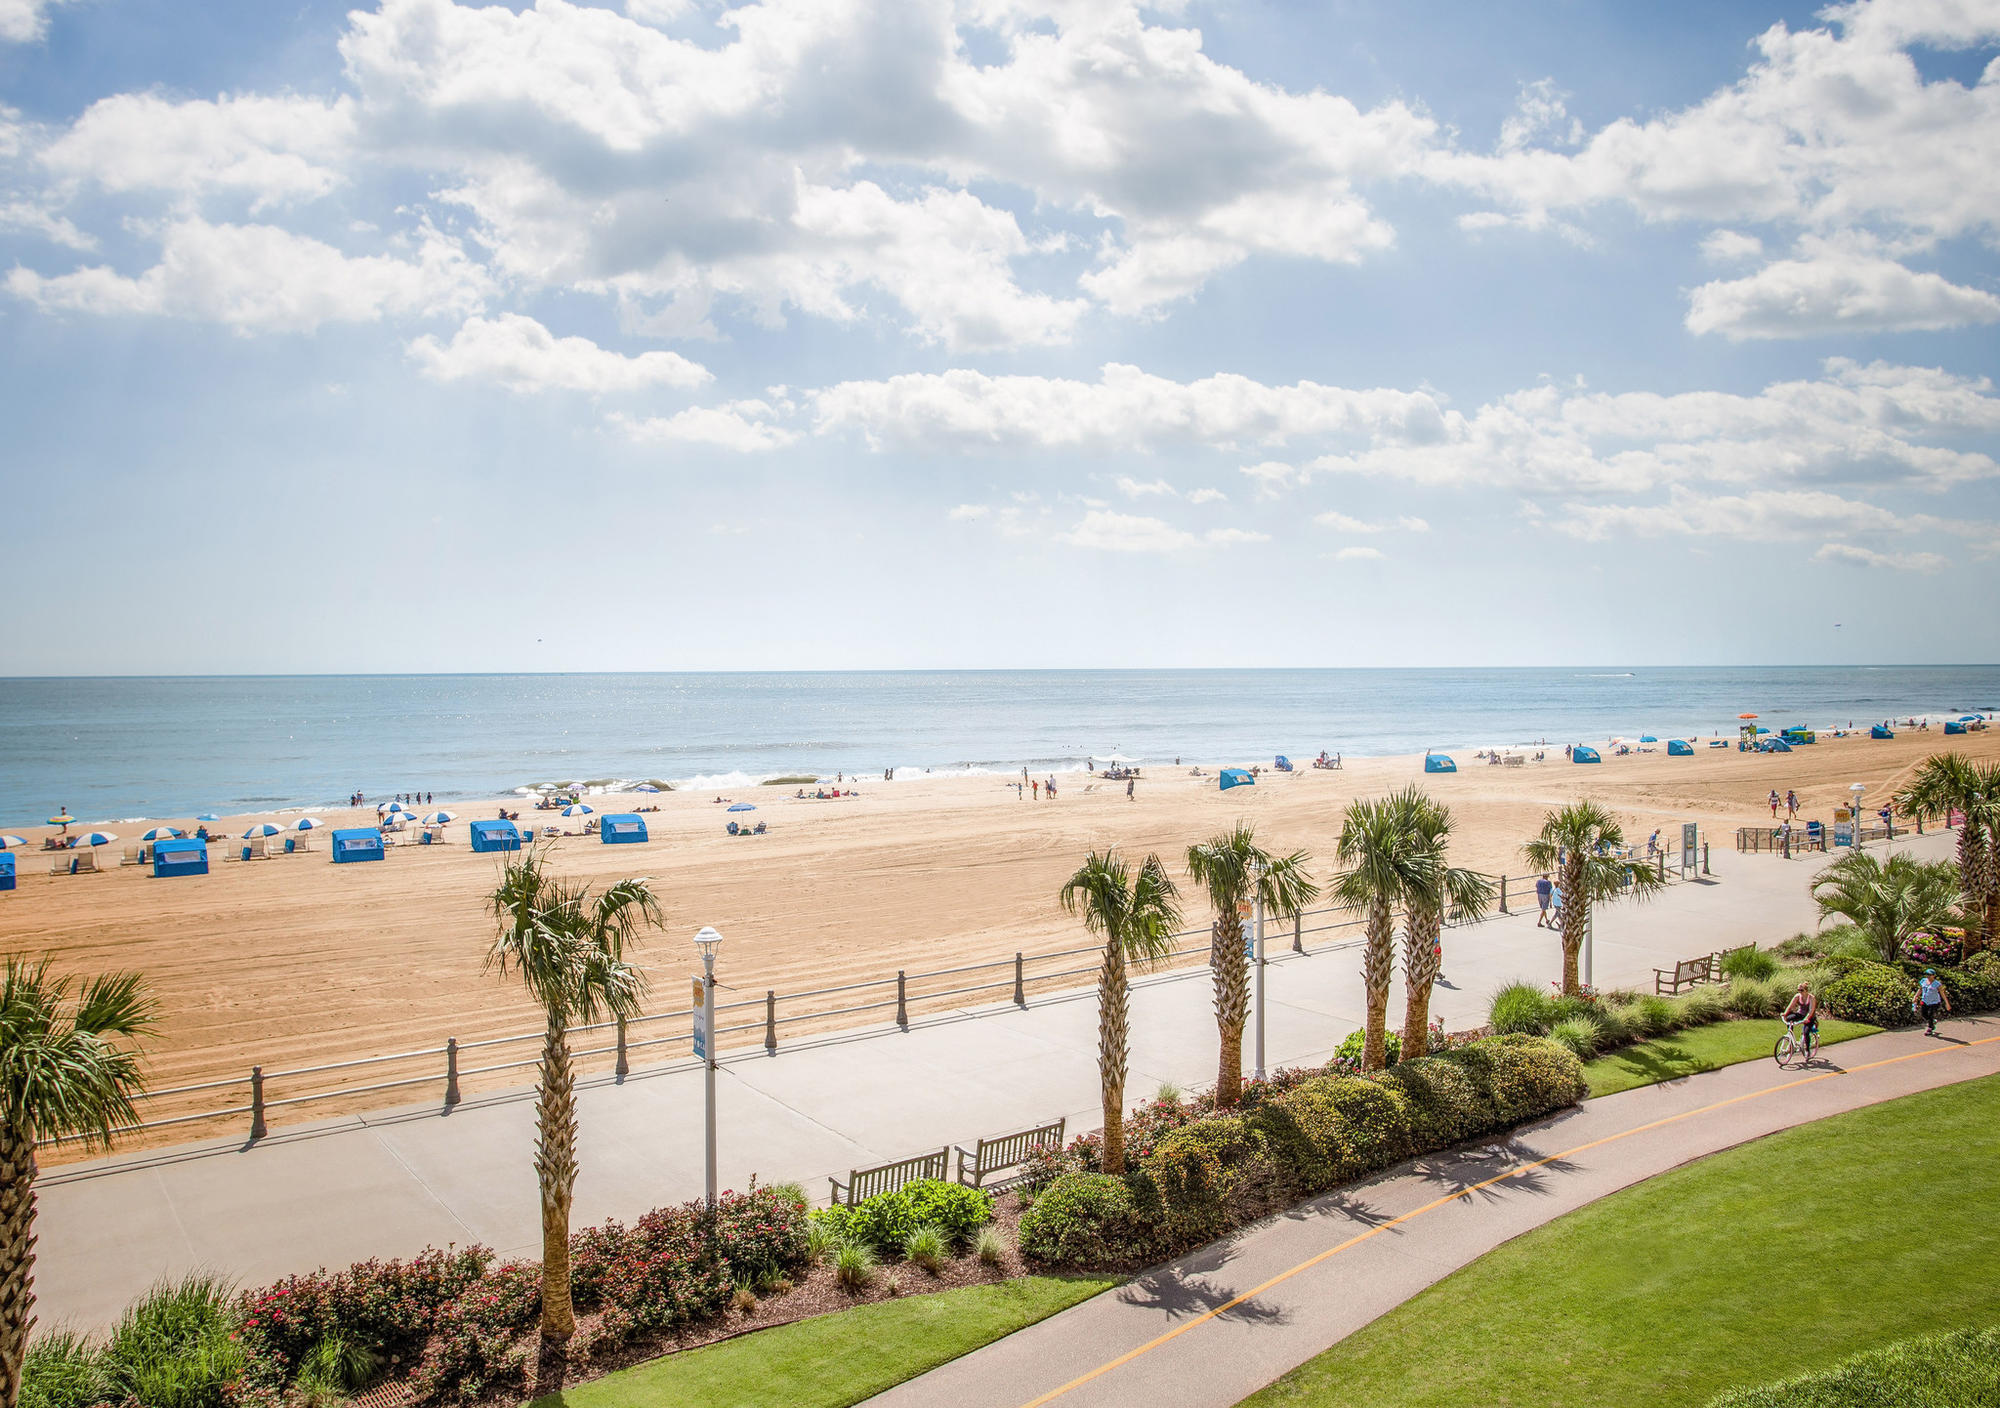 Virginia Beach: Where to take the kids and what to check out this